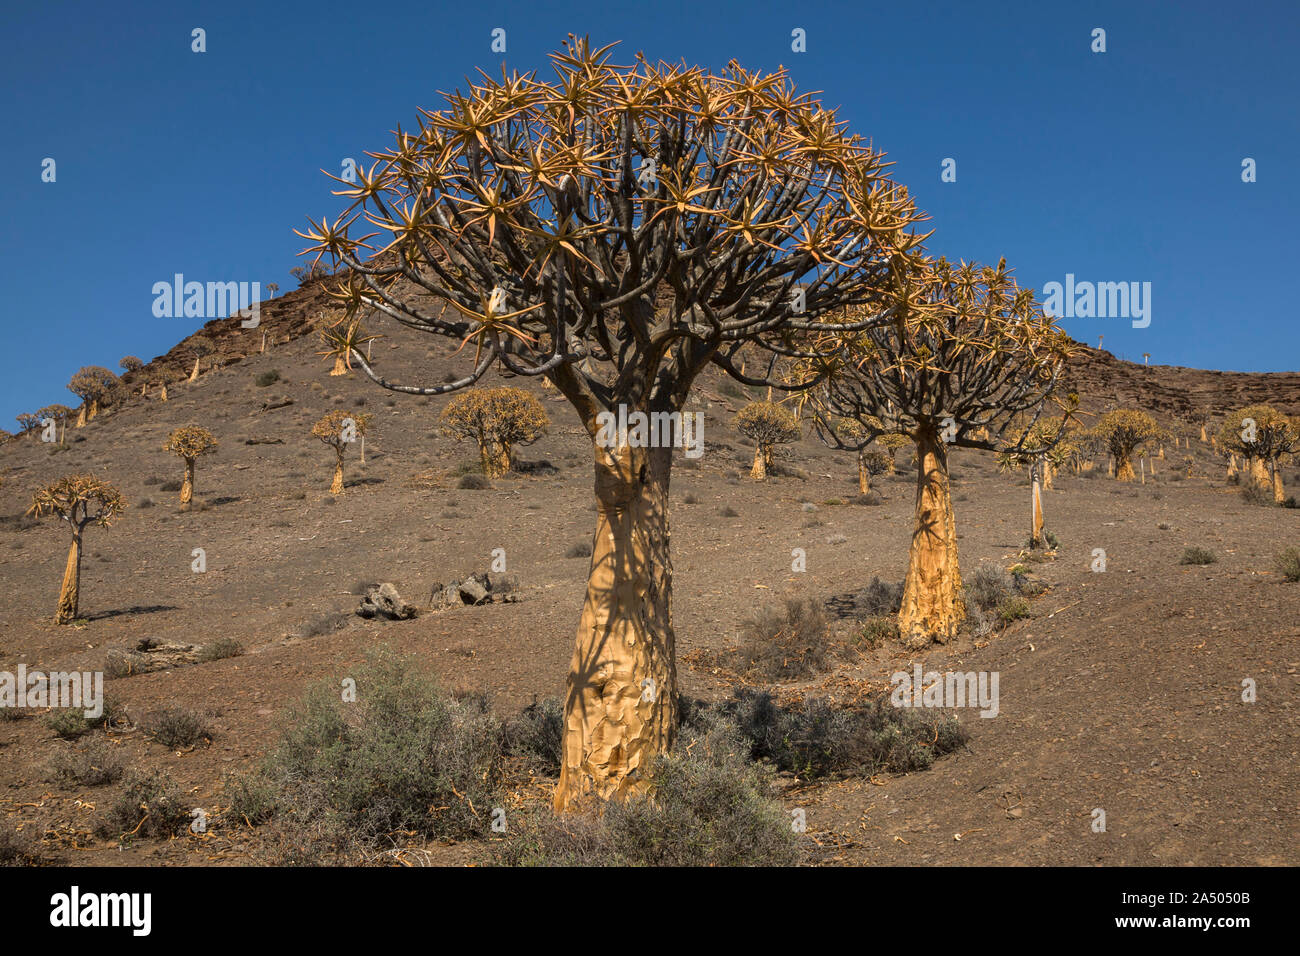 Quiver tree (Aloidendron dichotomum), near Nieuwoudtville, Northern Cape, South Africa Stock Photo